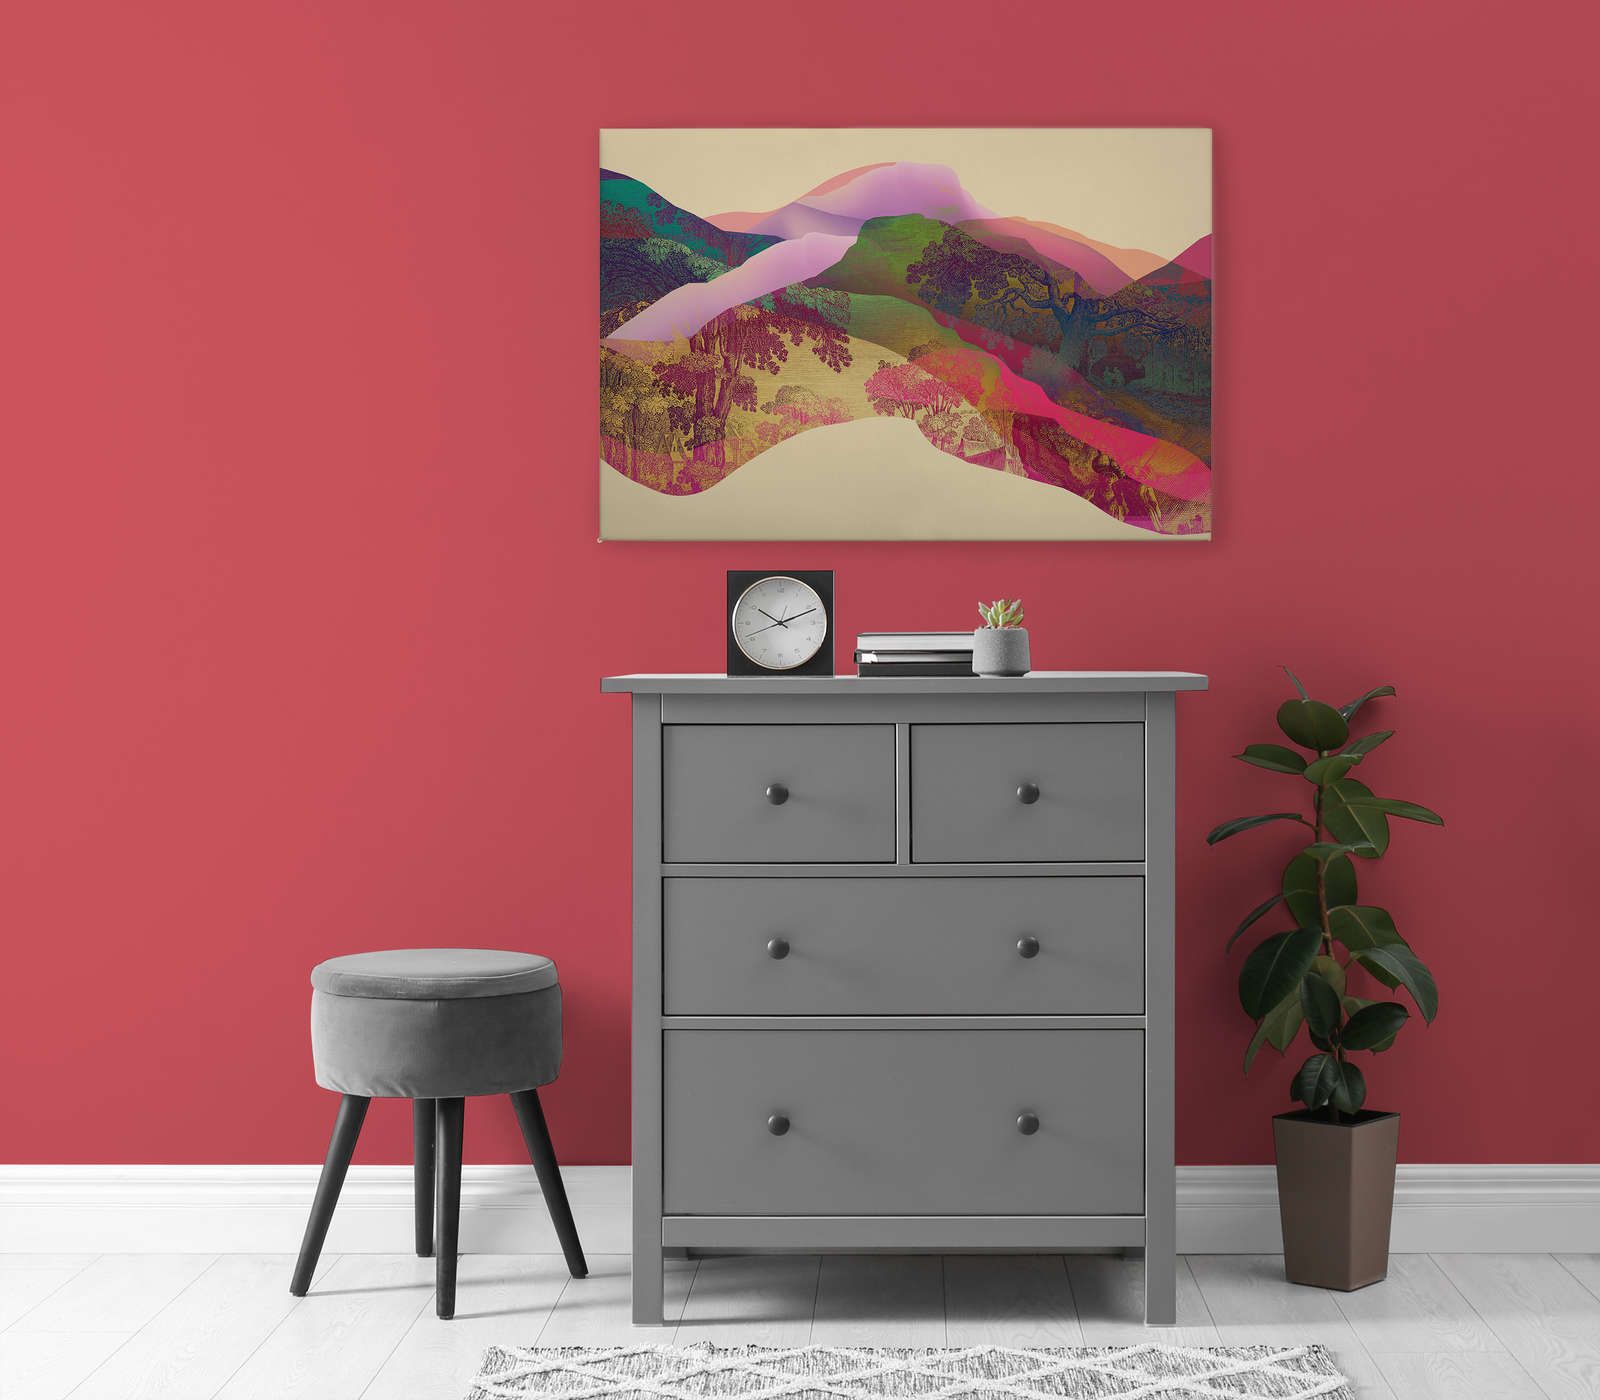             Magic Mountain 2 - Canvas painting Mountain landscape abstract - 0,90 m x 0,60 m
        